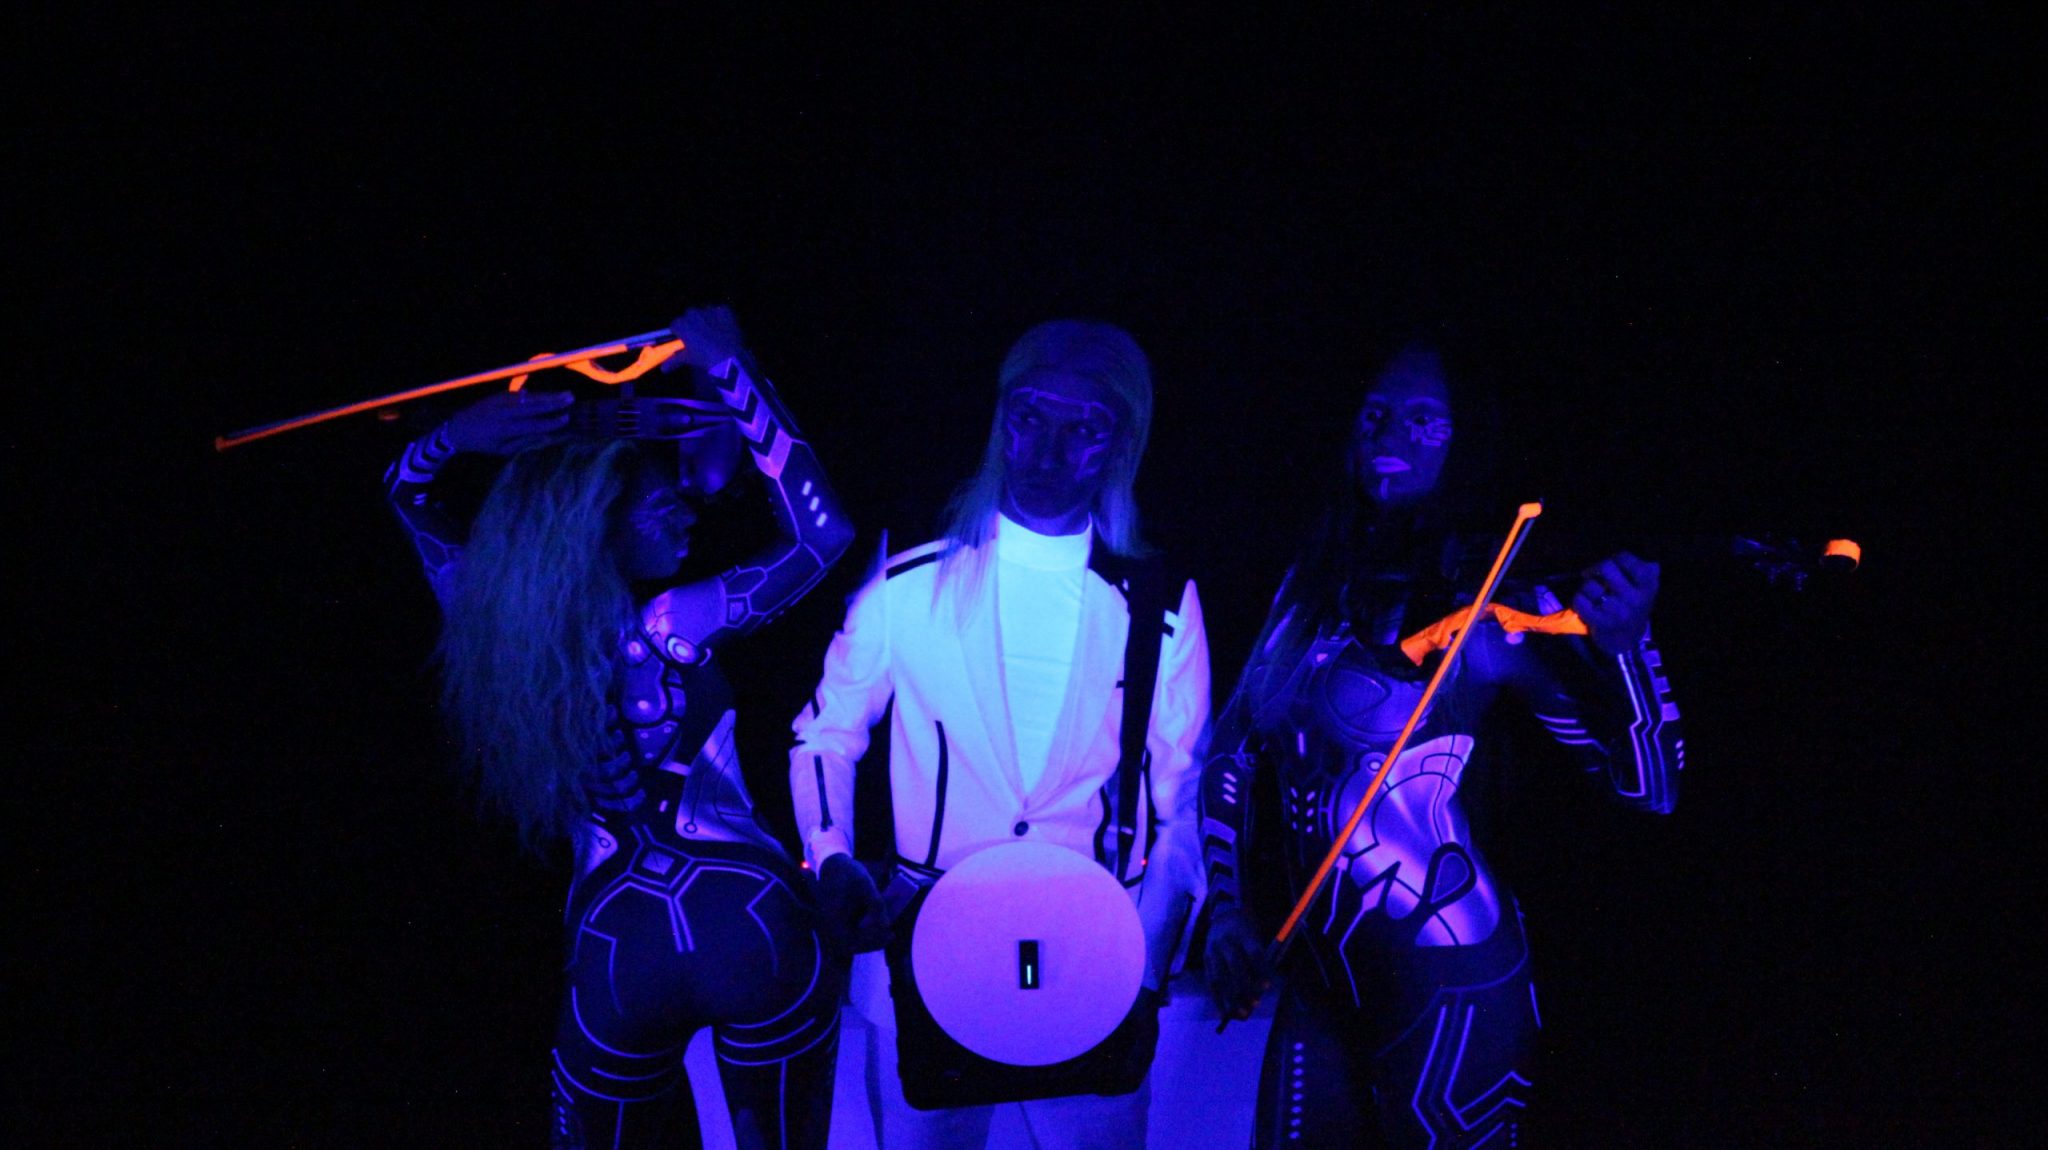 3 musicians lit UV Lights creating neon glow on their catsuits and corporate dress whites. dj holding portable turntable Violinists holding glow in the dark violins #vynilyn #lrbaggs #cordialcablesusa #codabow #thomastikinfeld #dollskillclothing #yamahaelectricviolin #justfabstyle #yamahamusic #electricviolin #electricviolinists #electricviolinist #aliens👽 #notfromthisworld #dancingviolinist #djculture #djviolinist #djviolin #femaleartist #femalemusicians #longhairedman #followusonyoutube #vinylart #bookmorewomen #eventplanner #eventplanning #eventprofs #meetingprofs #corporateeventplanner #meetingplanner #corporateevent #zoomhappyhour #virtualevents 